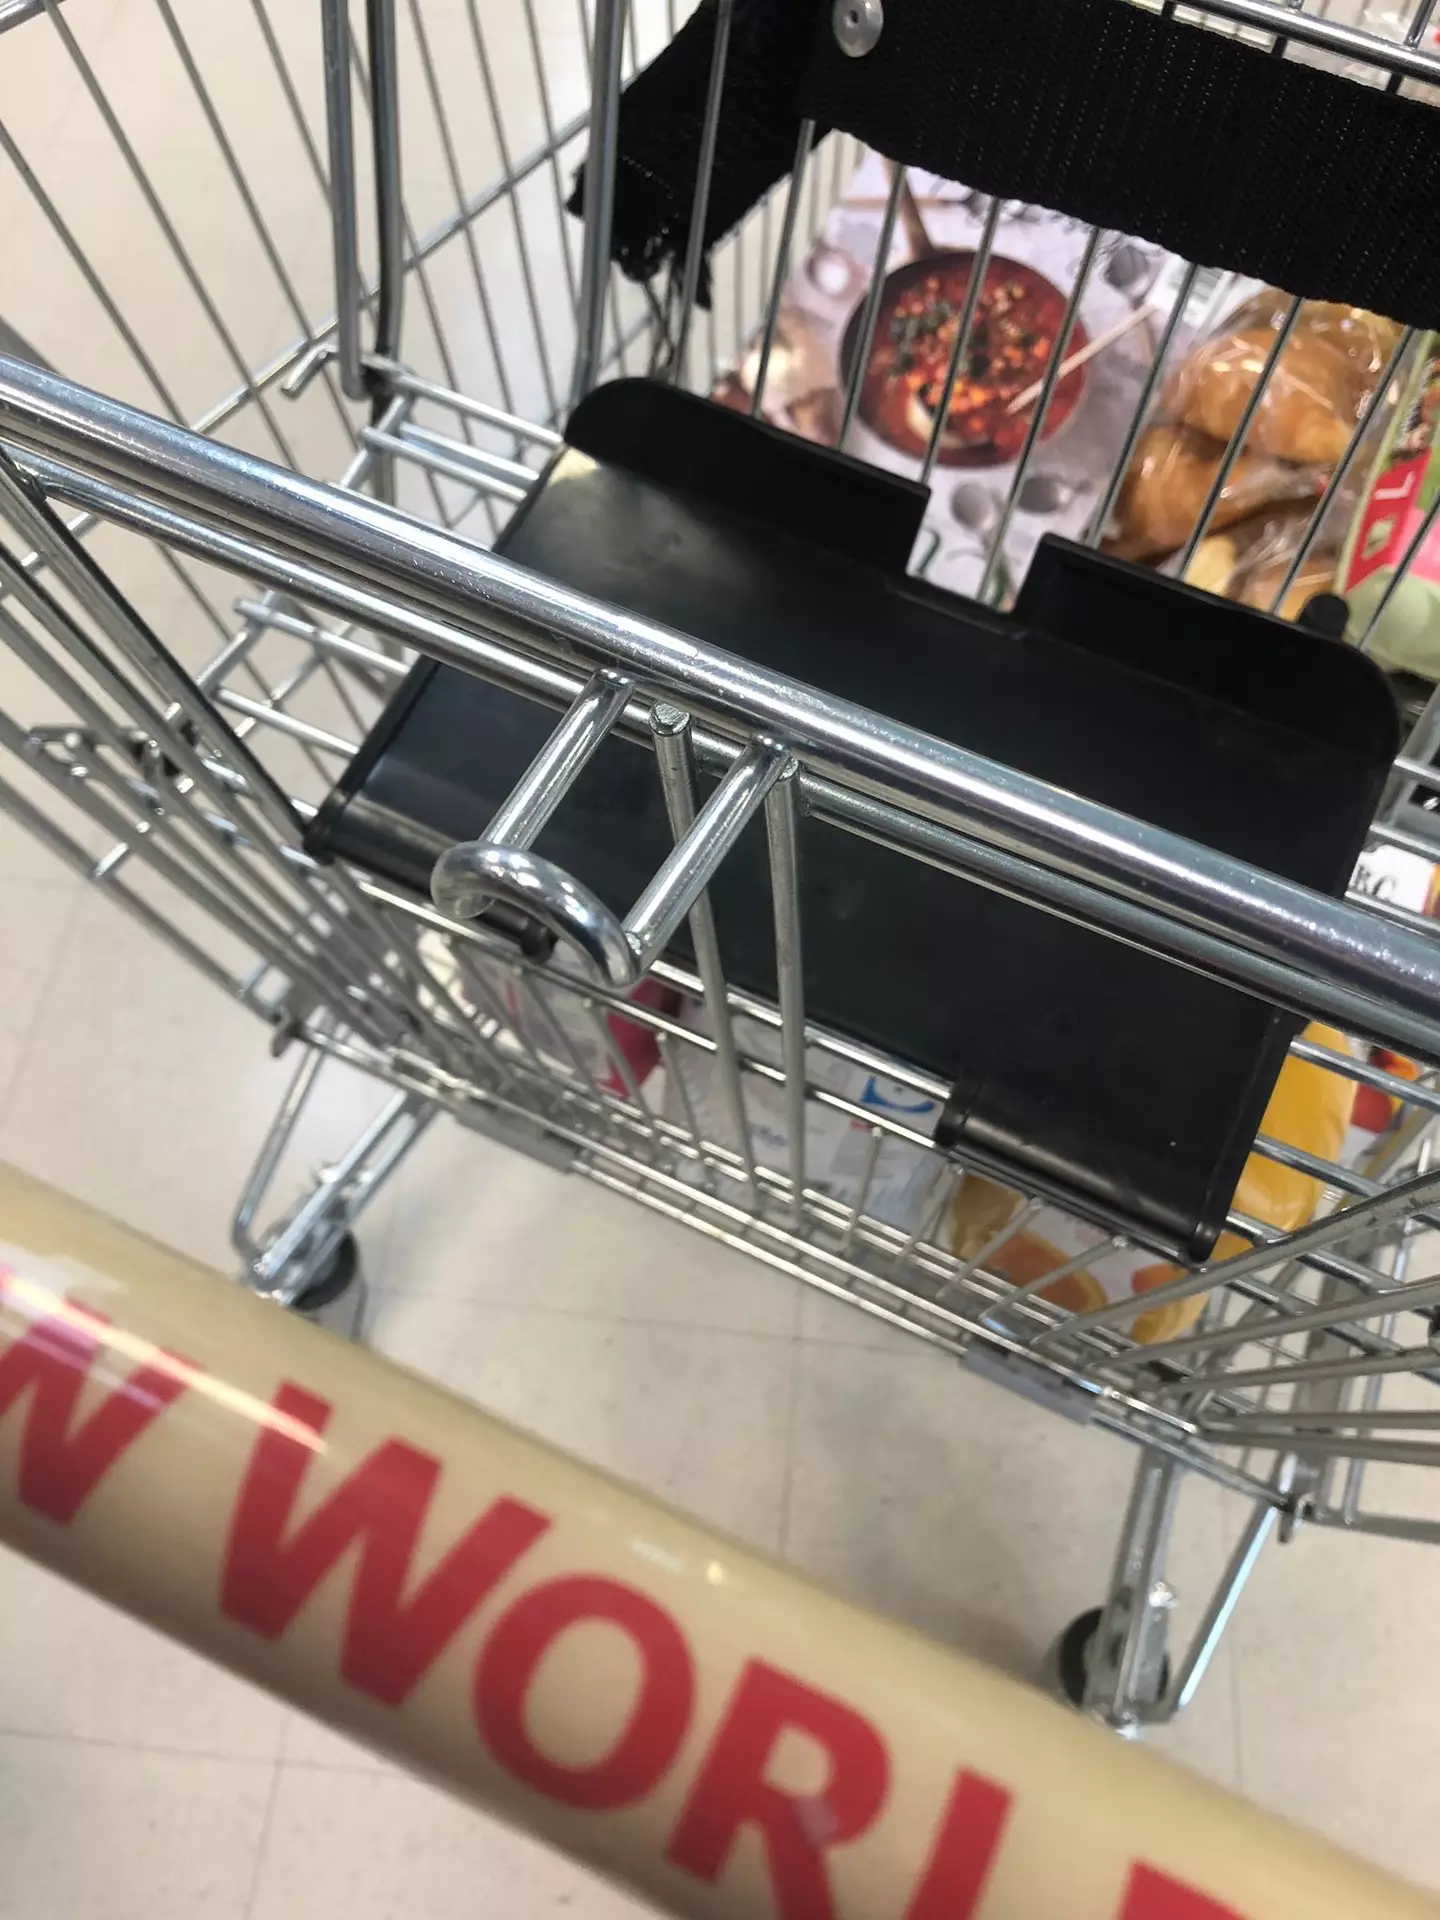 A lot of people did not even know about the hook on a trolley.